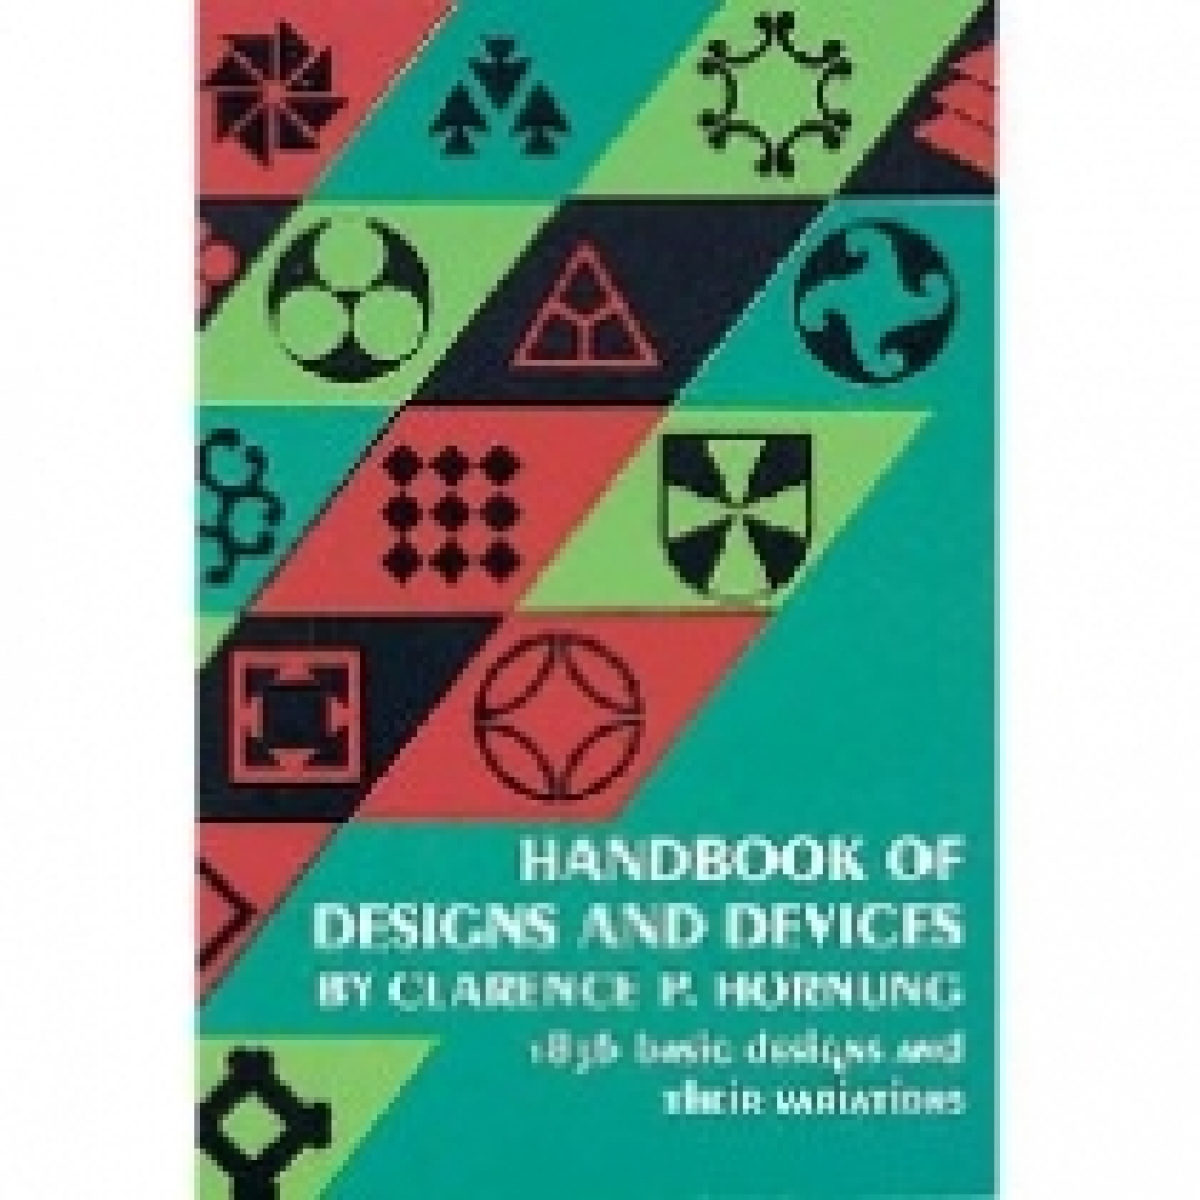 Hornung, Clarence P. Handbook of Designs and Devices 